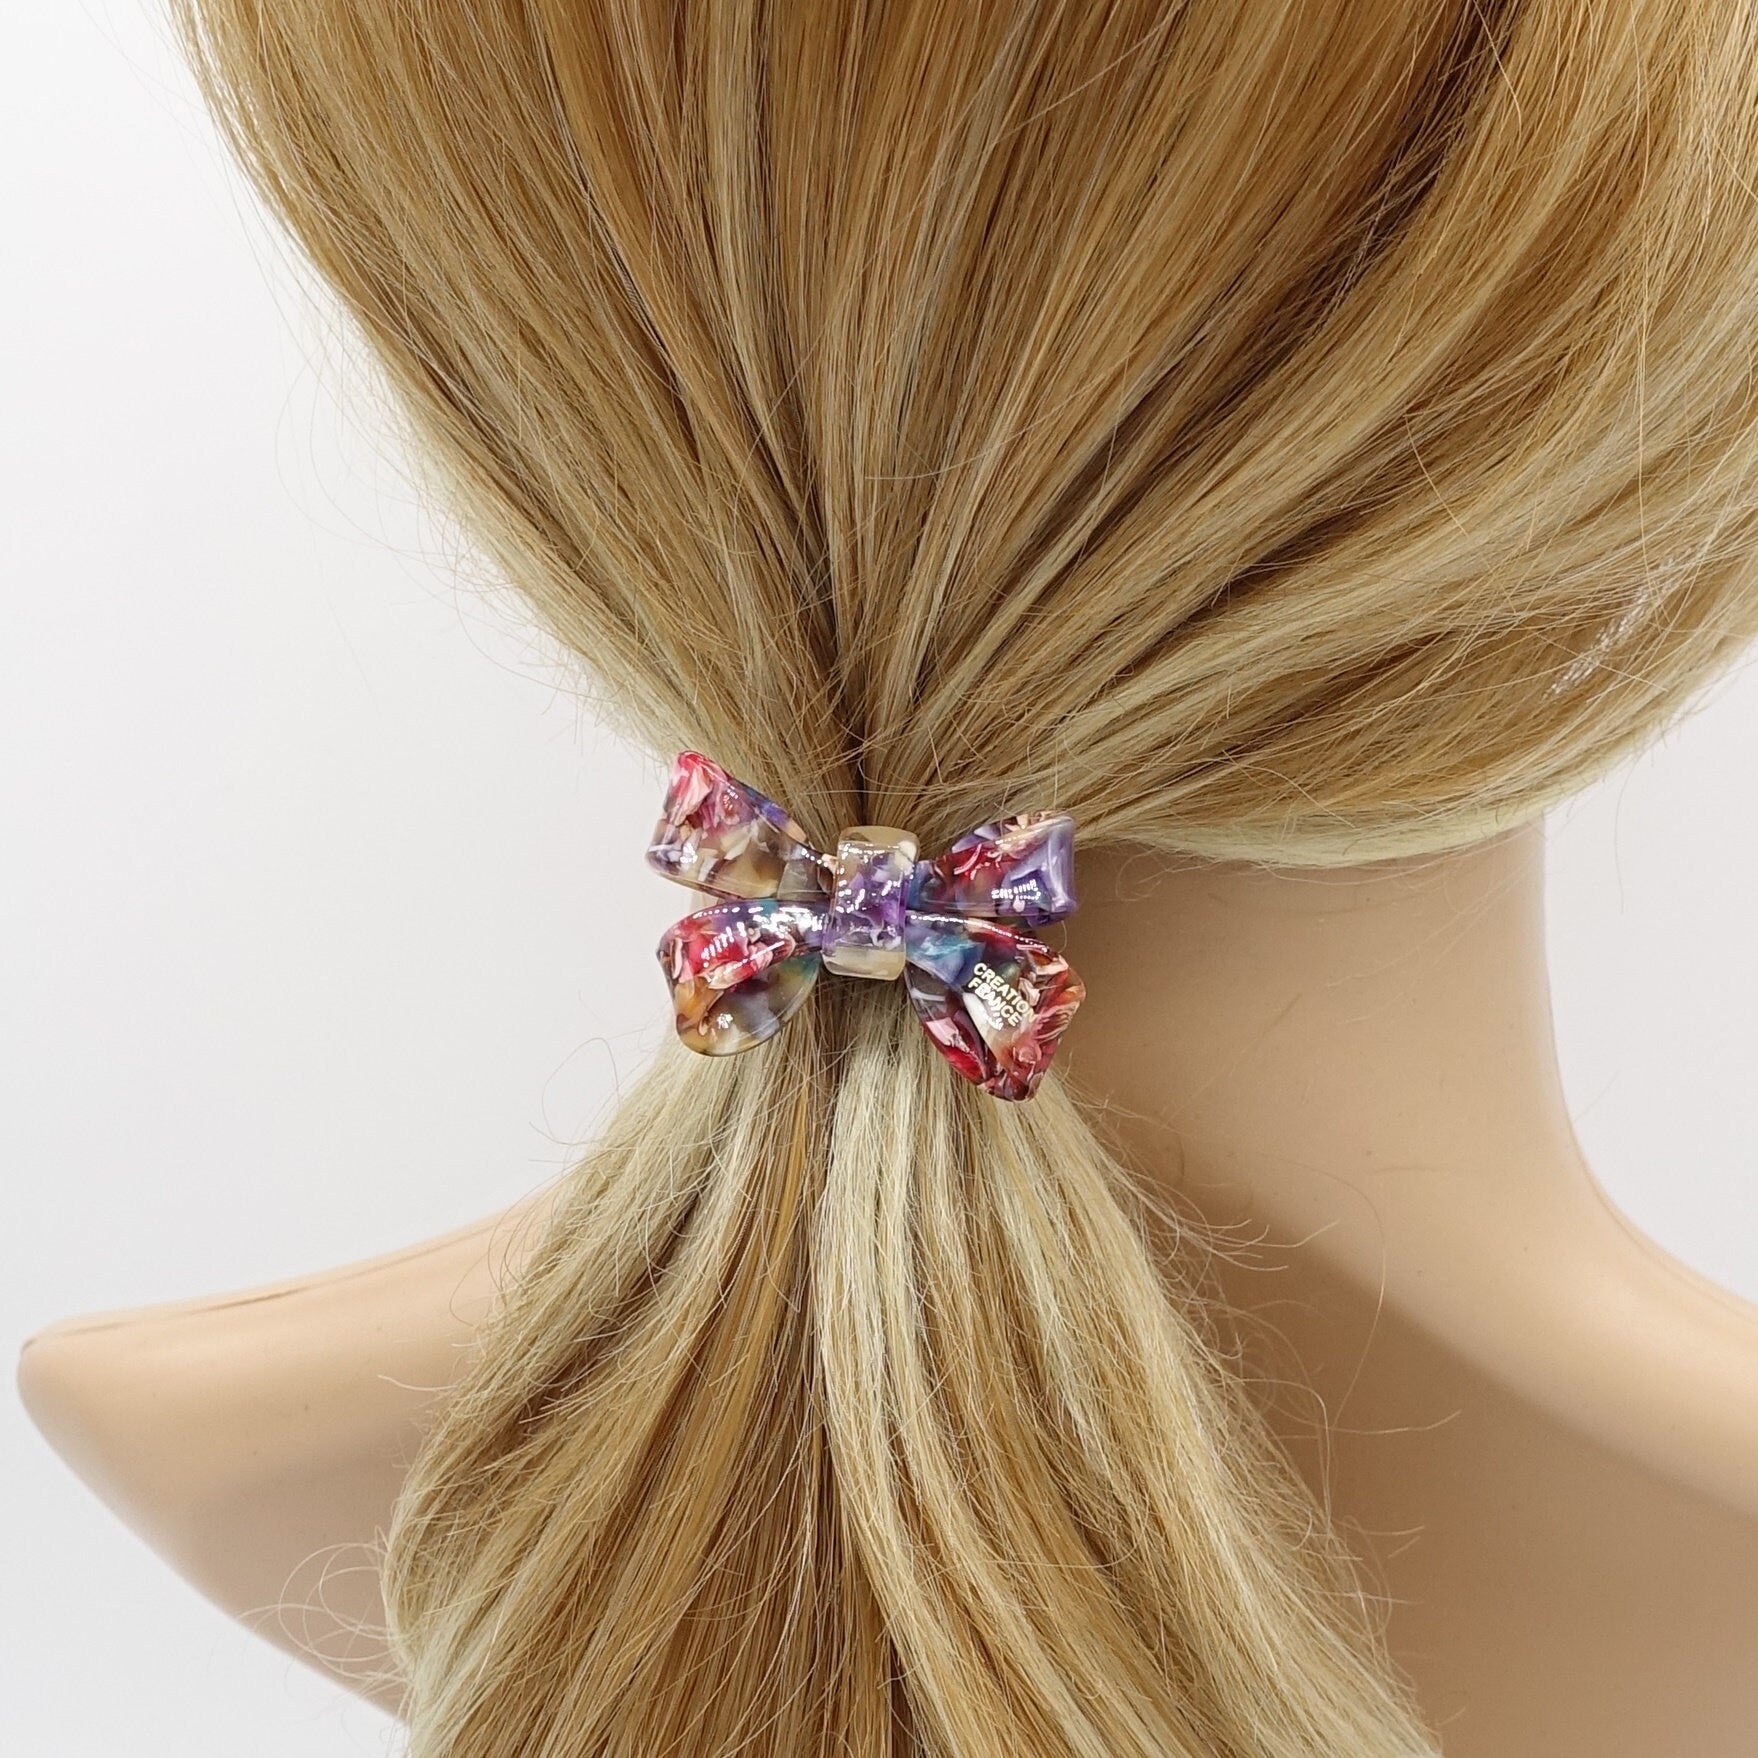 veryshine.com Ponytail holders cellulose acetate tail bow knot hair tie elastic ponytail holder